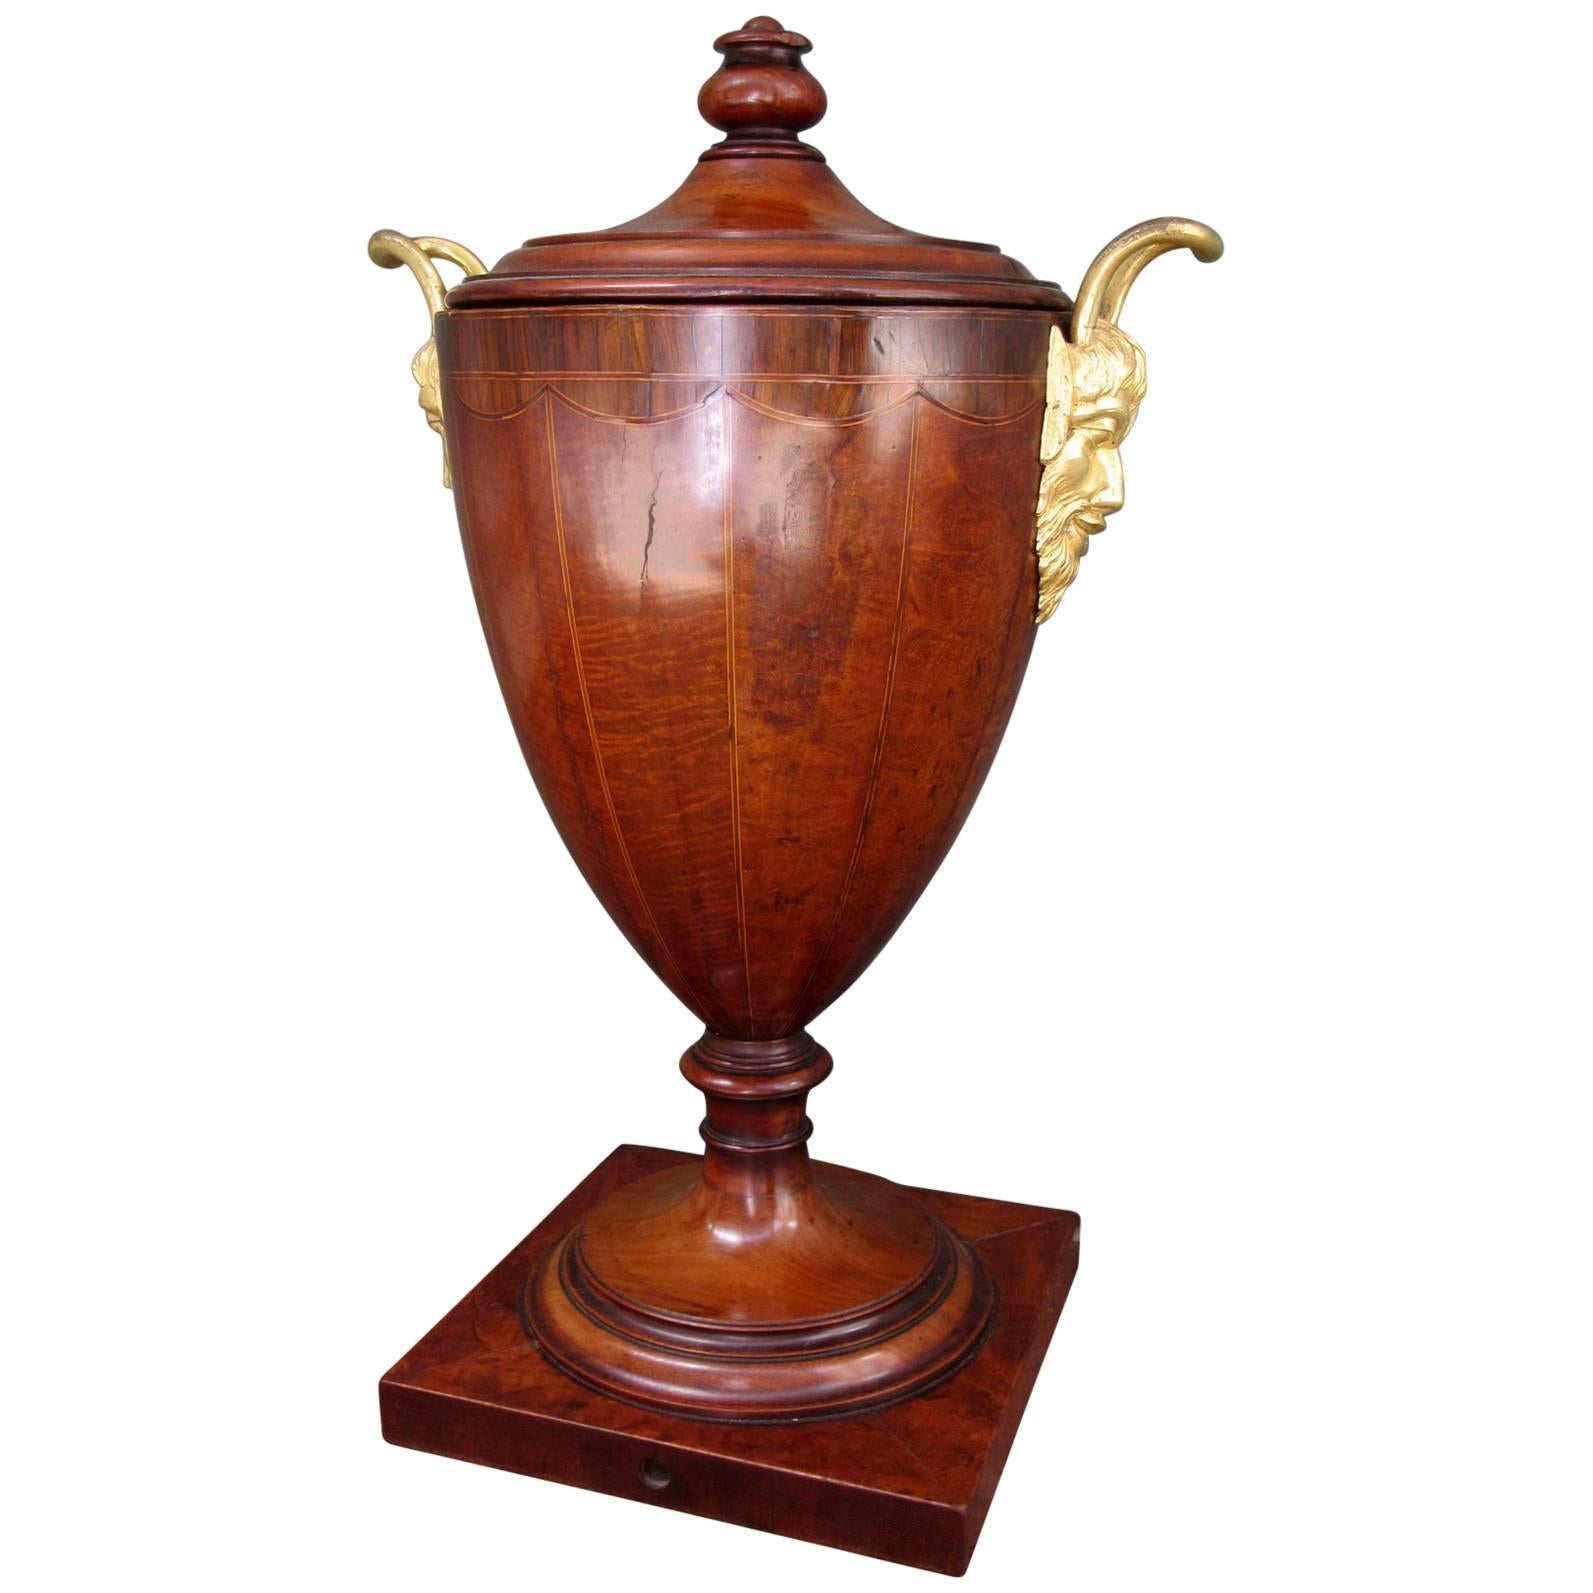 Late 18th Century English George III Mahogany and Bronze Doré Urn or Wine Cooler